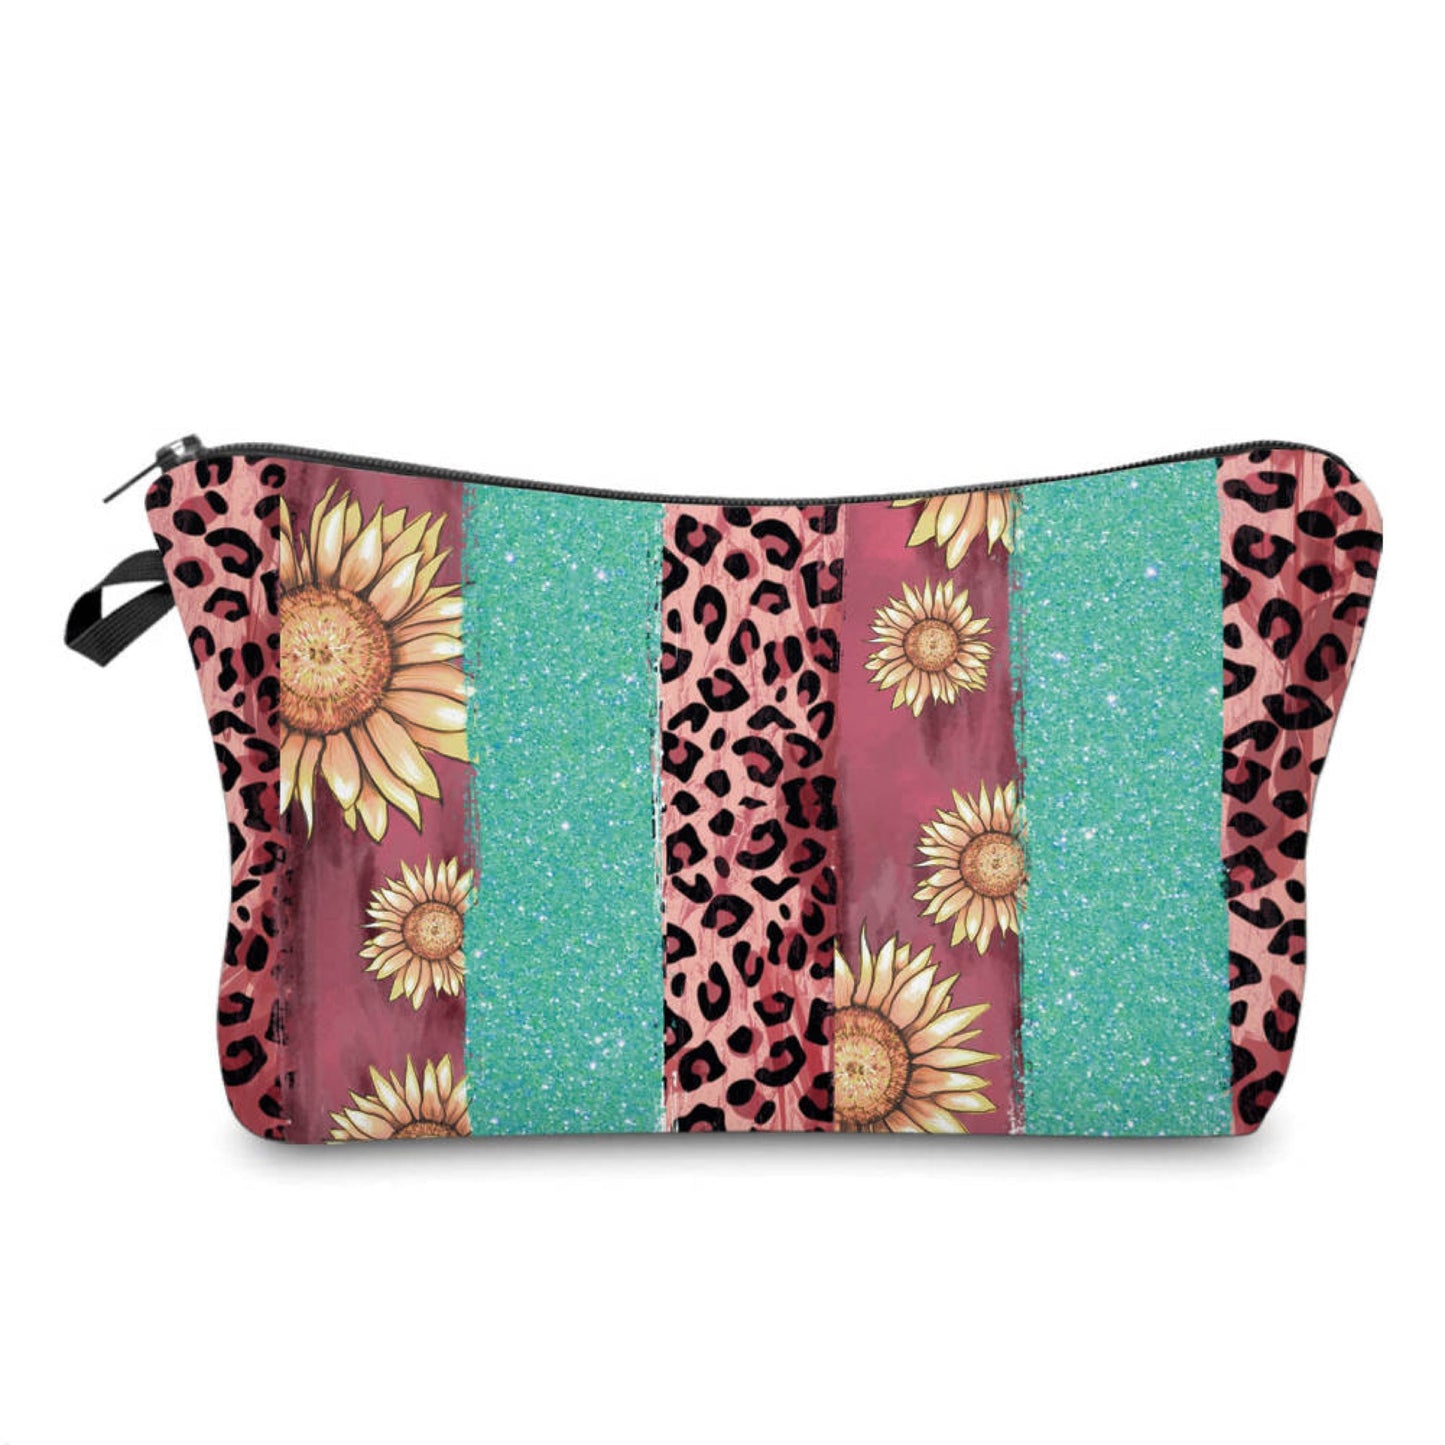 Pouch - Sunflower Mint Dusty Rose Animal